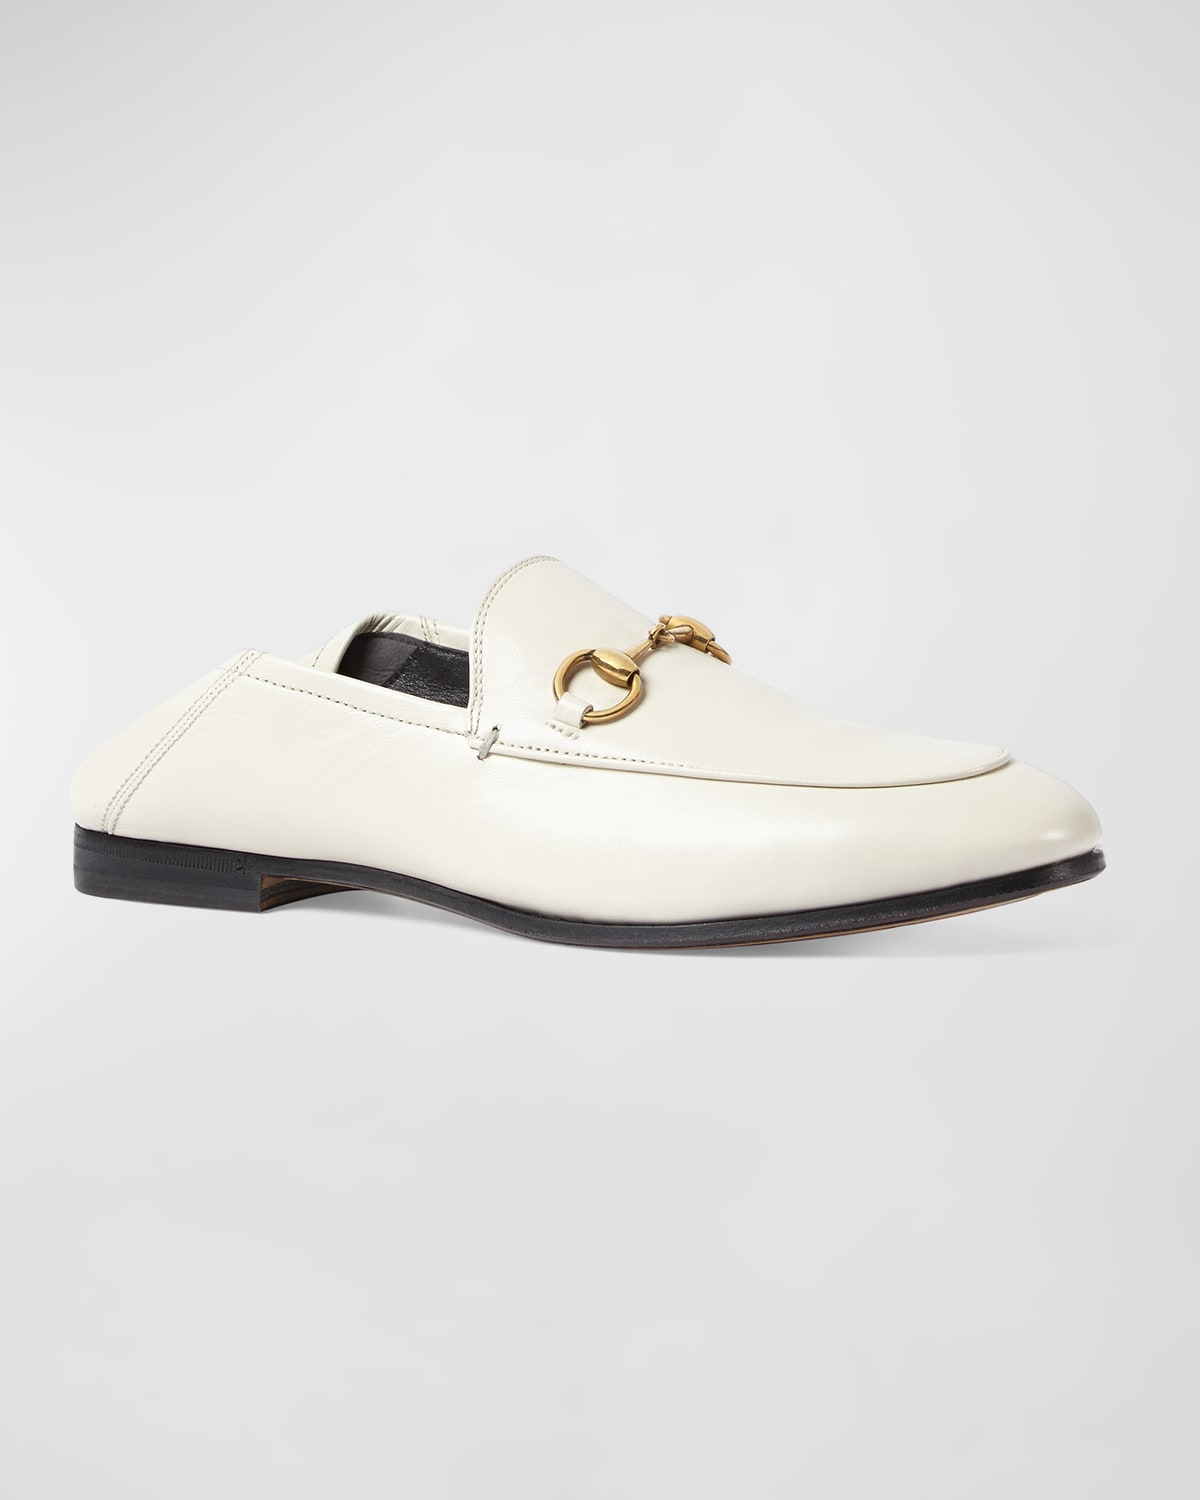 Gucci Brixton Leather Horsebit Loafers